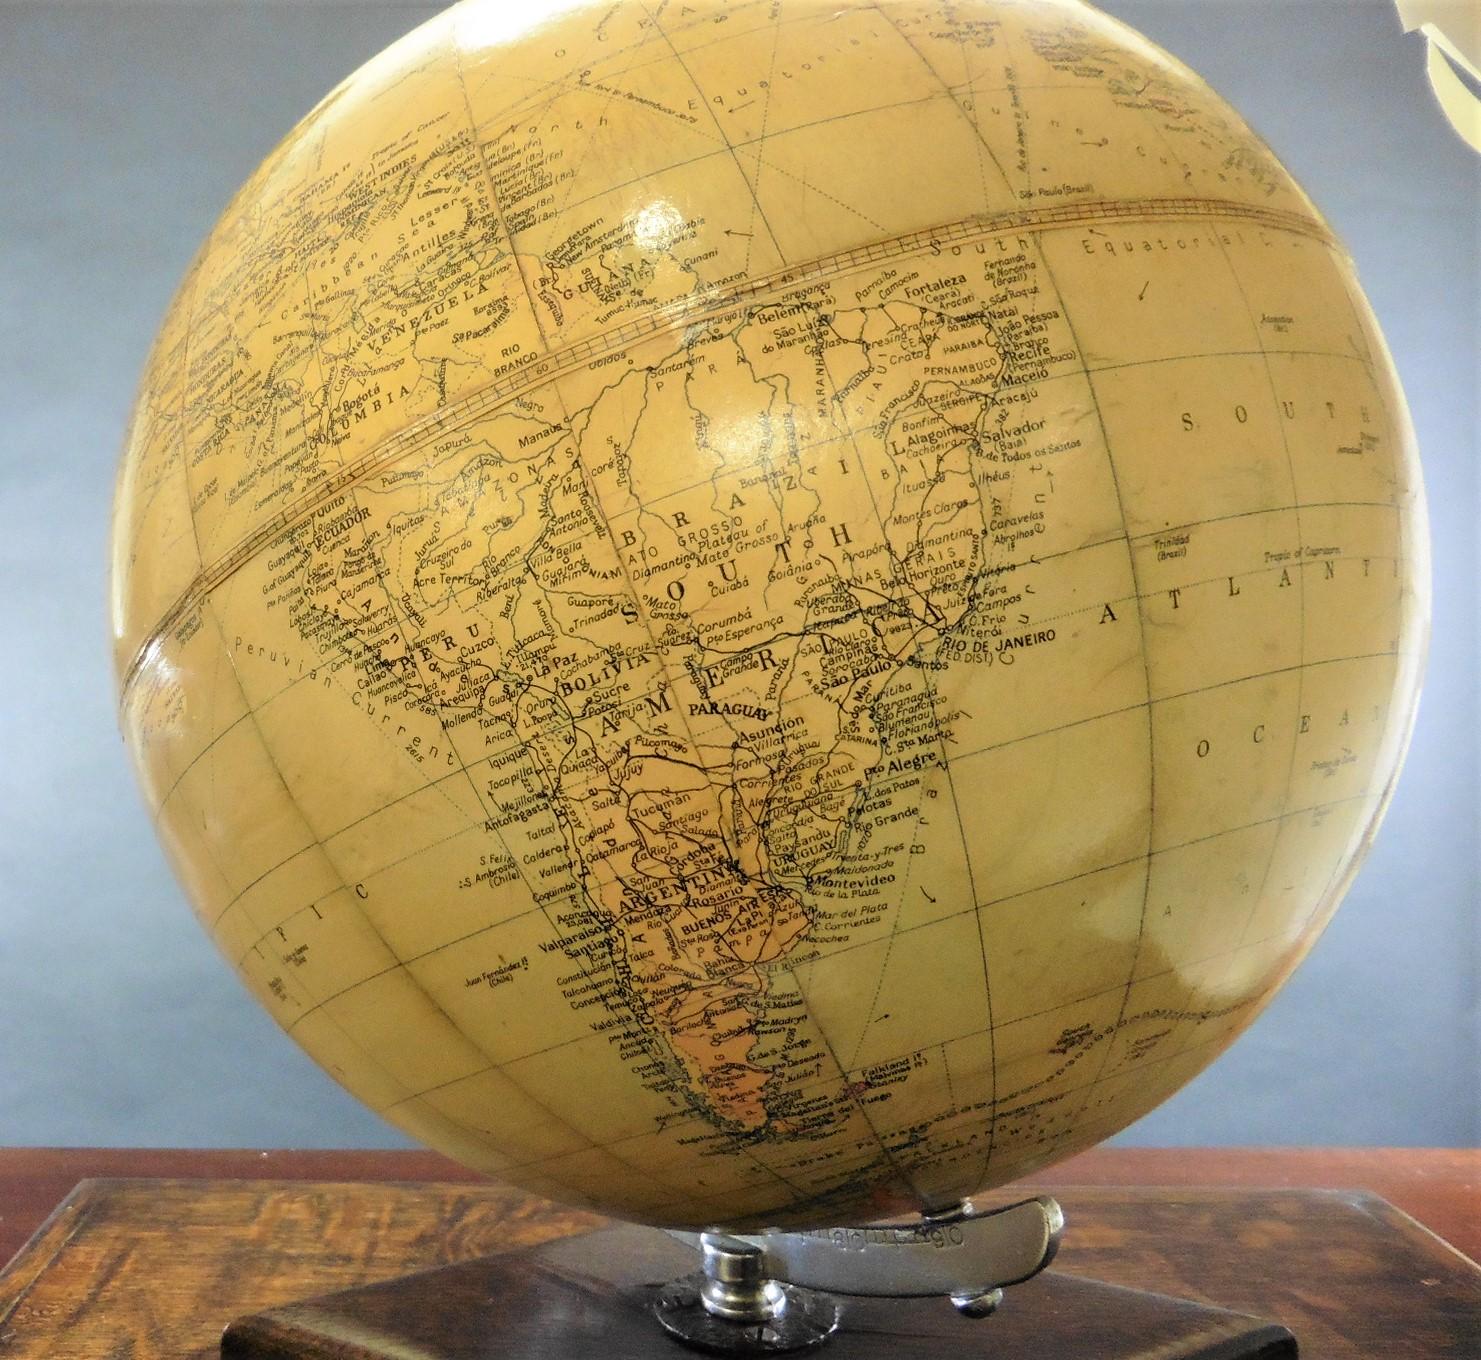 Philips 10 inch challenge globe

Philips 10 inch globe standing on a raised oak chamfered base and resting on a rectangular oak base incorporating a ribbon pull to reveal it’s original Graphic Atlas by Bartholomew ( it is rare to find one of these